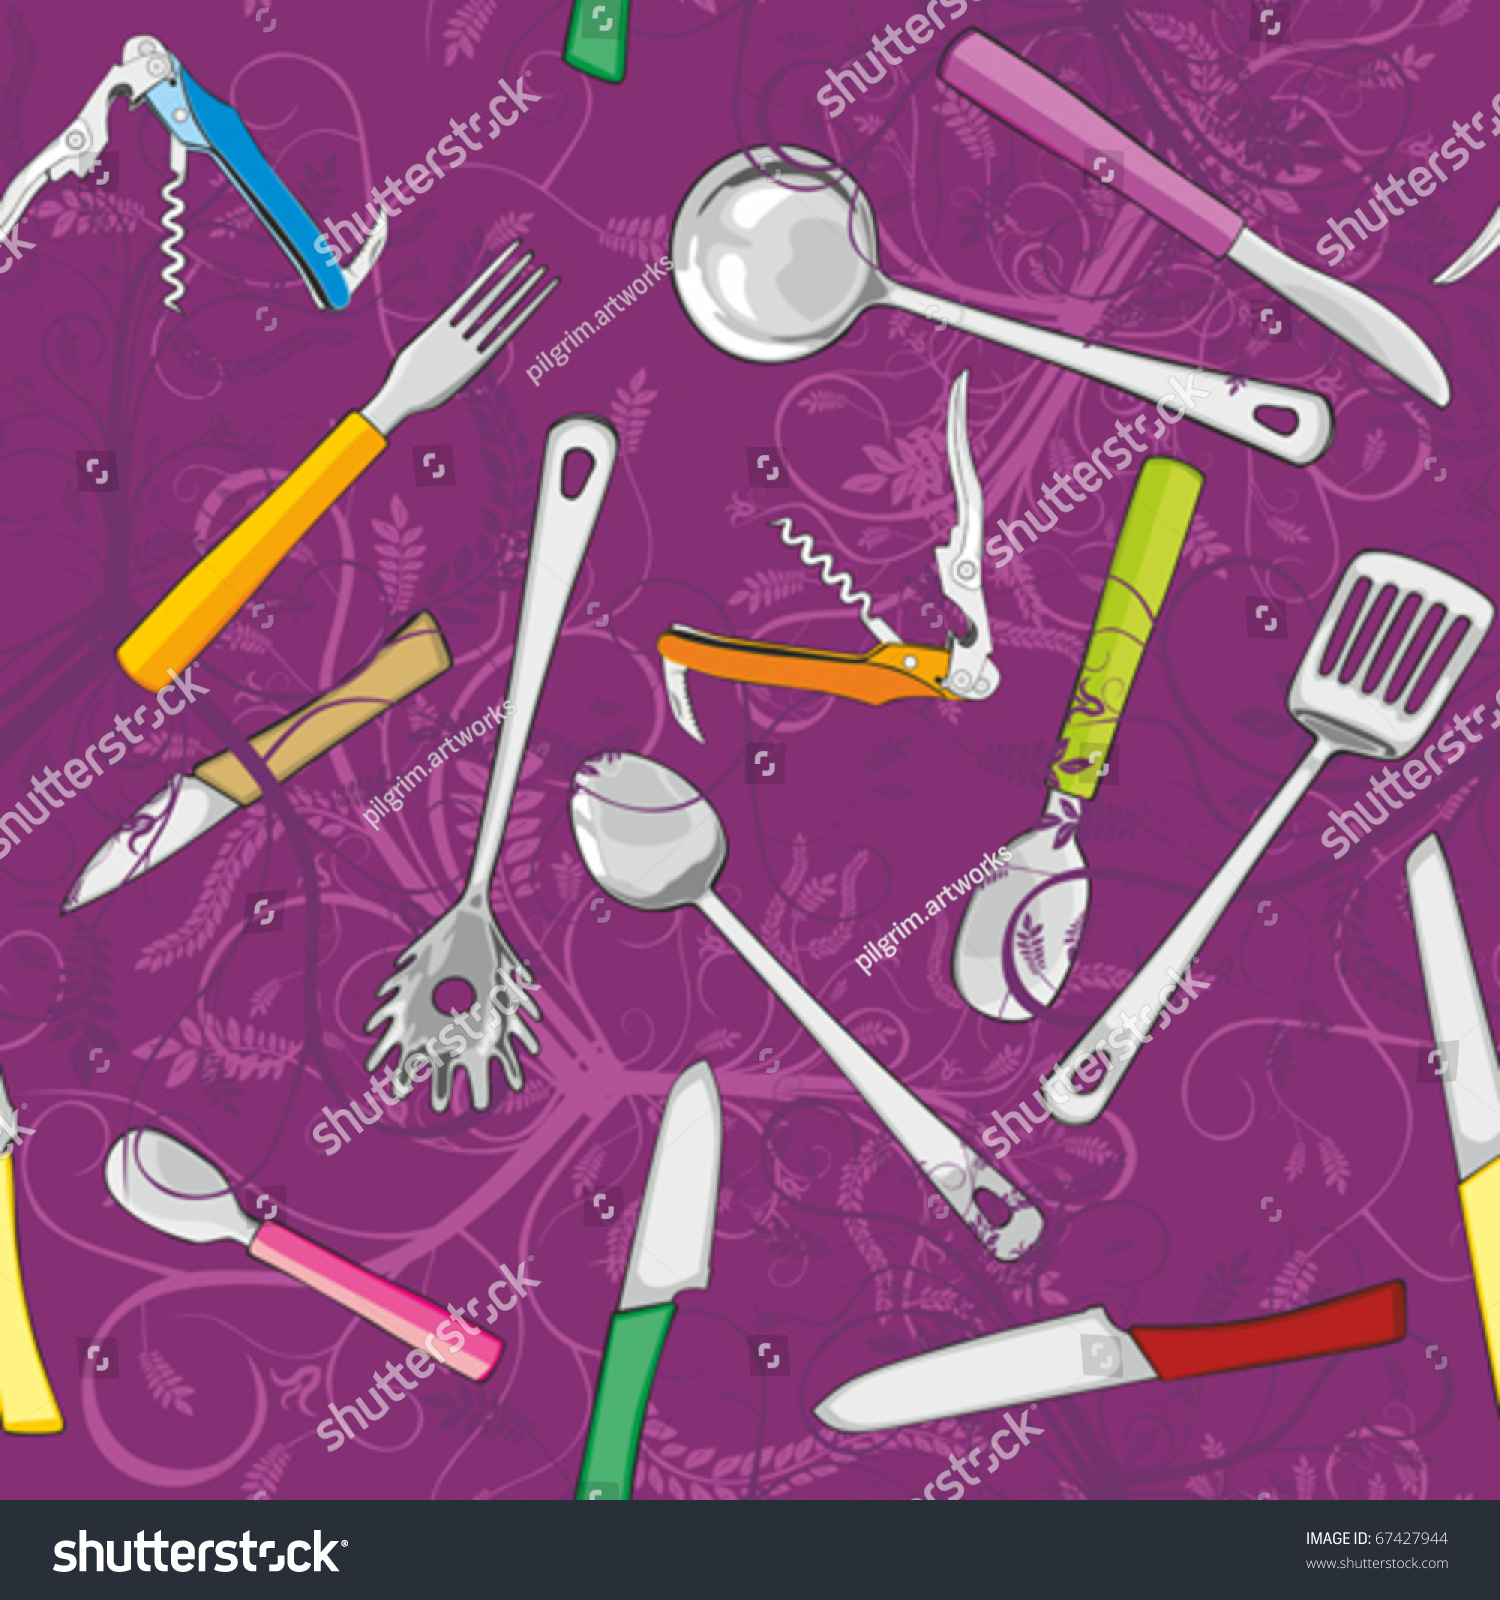 fully editable vector illustration seamless with kitchen tools #67427944